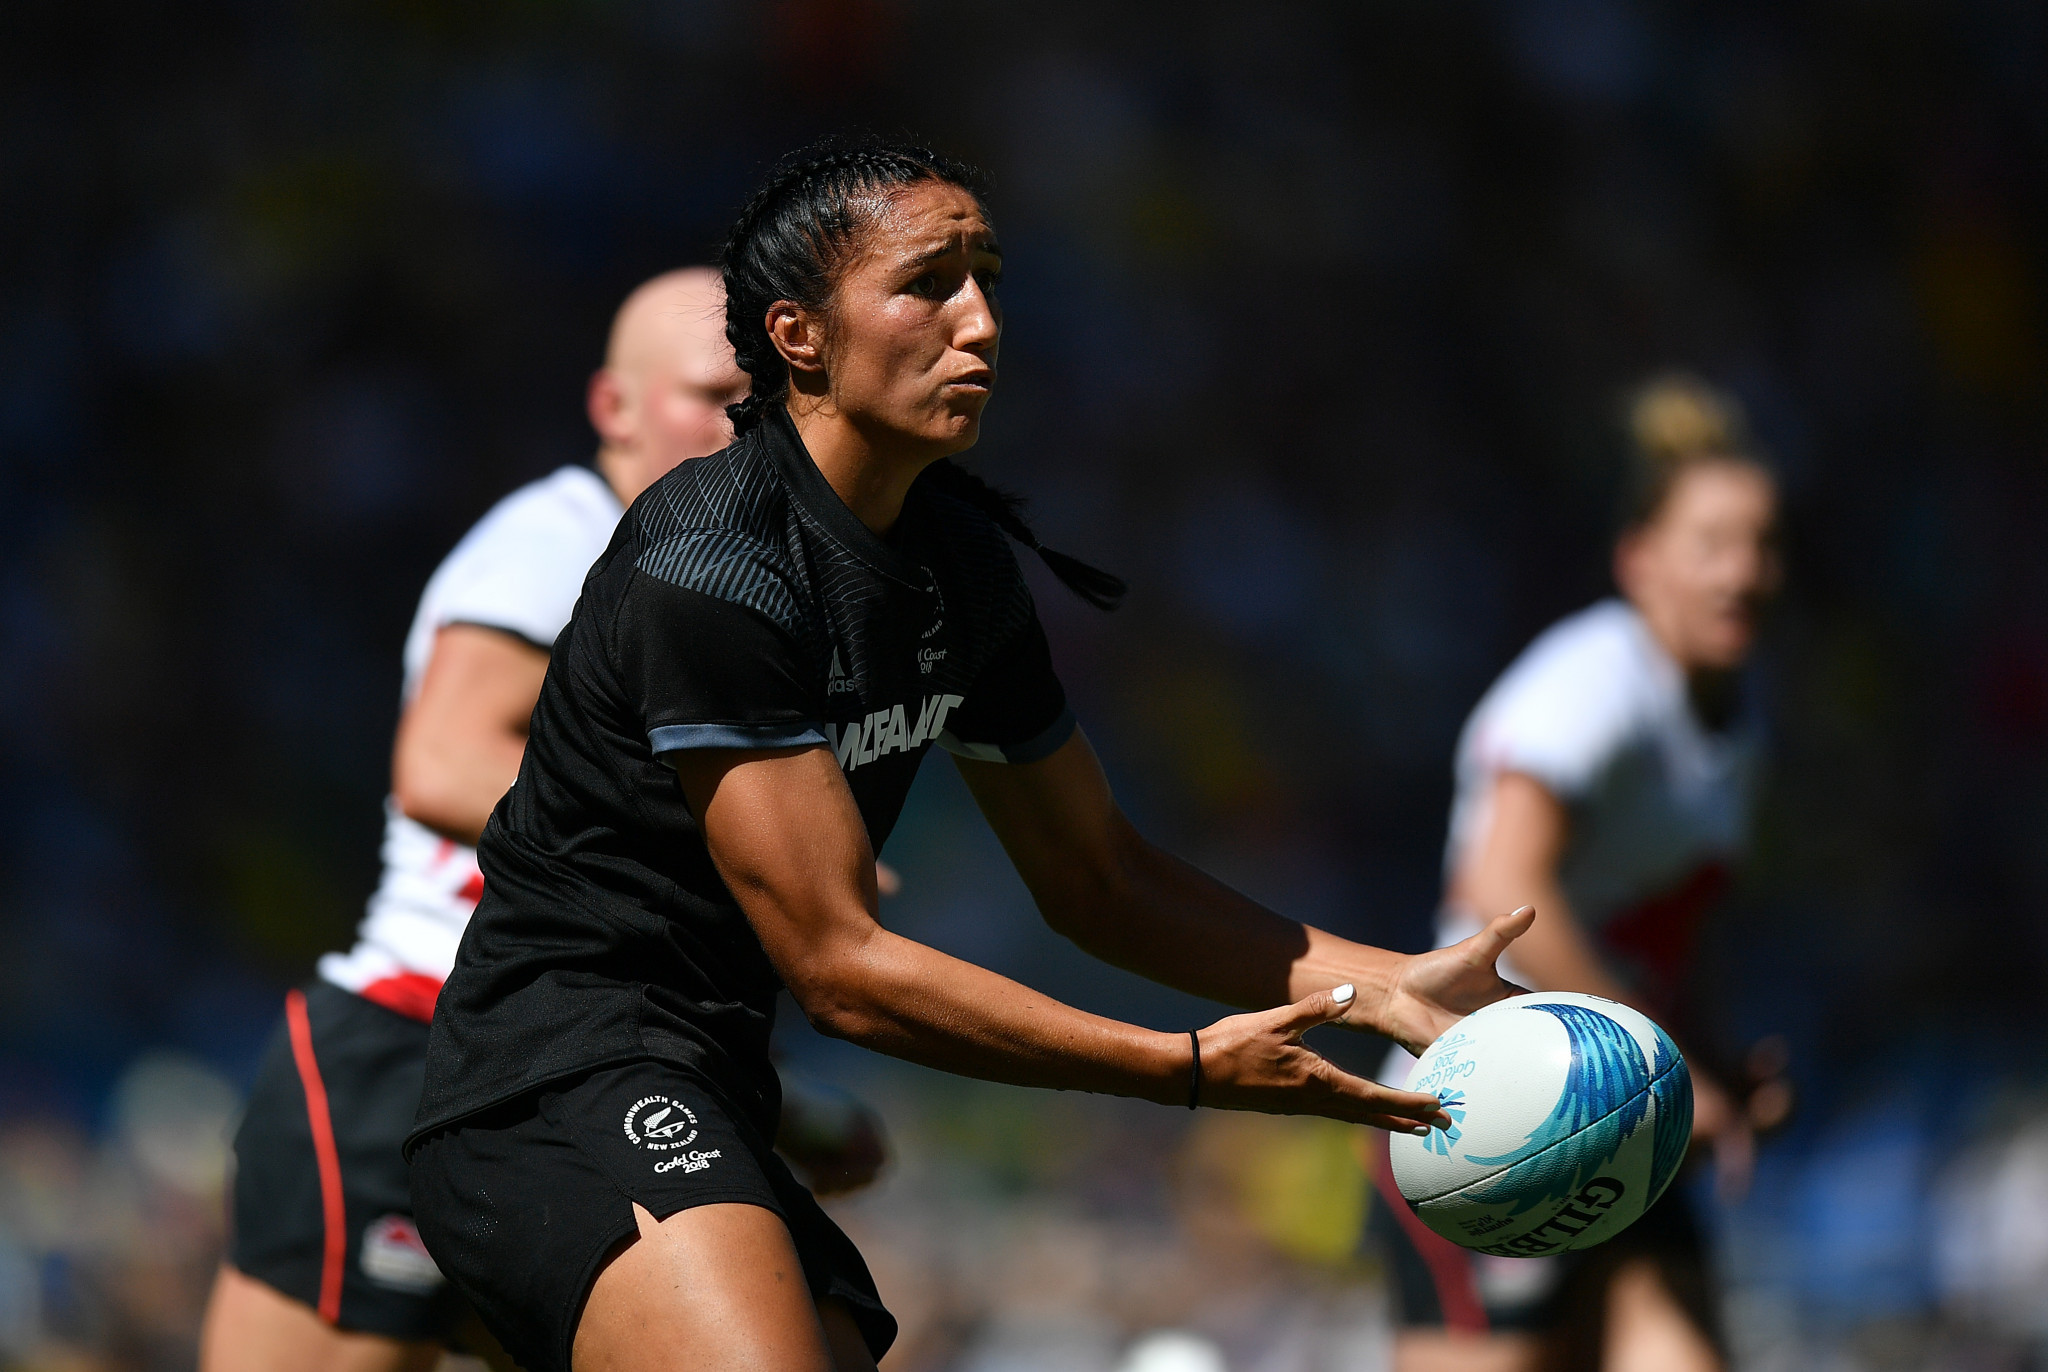 New Zealand hoping to build on Gold Coast 2018 triumph at Women's Sevens Series in Kitakyushu